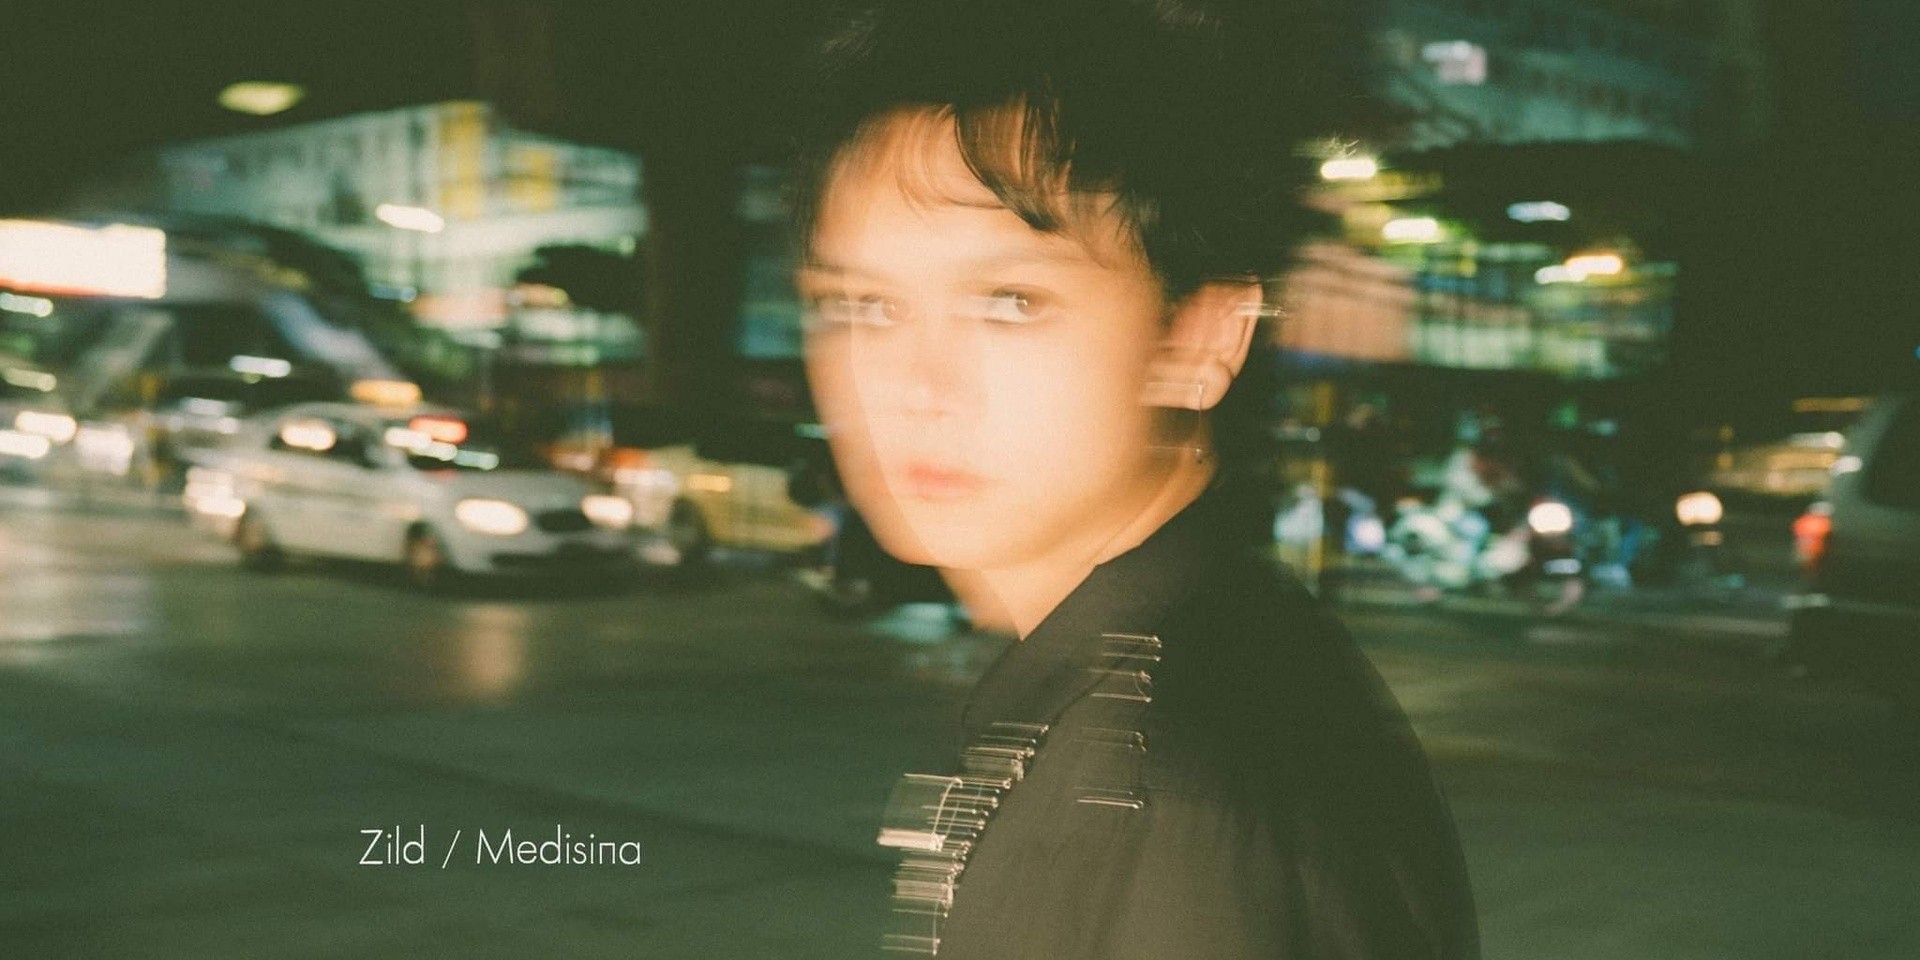 Zild to celebrate Halloween with 'Medisina' album launch featuring  Barbie's Cradle, ena mori, One Click Straight, and more